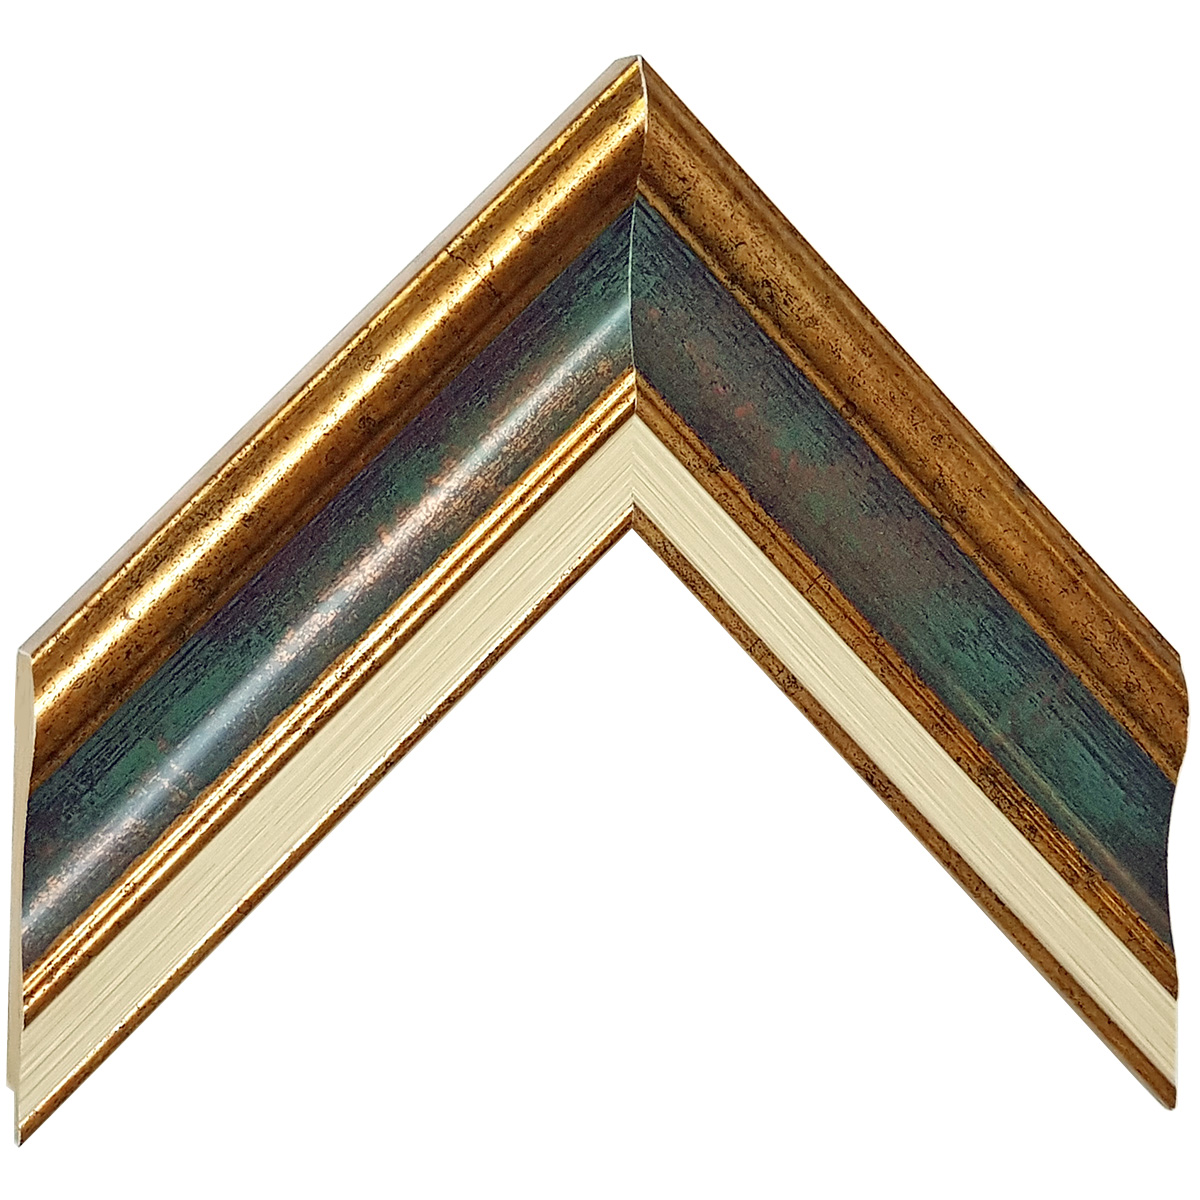 Moulding finger-jointed pine - width 61mm height 20 - Gold, blue band - Sample